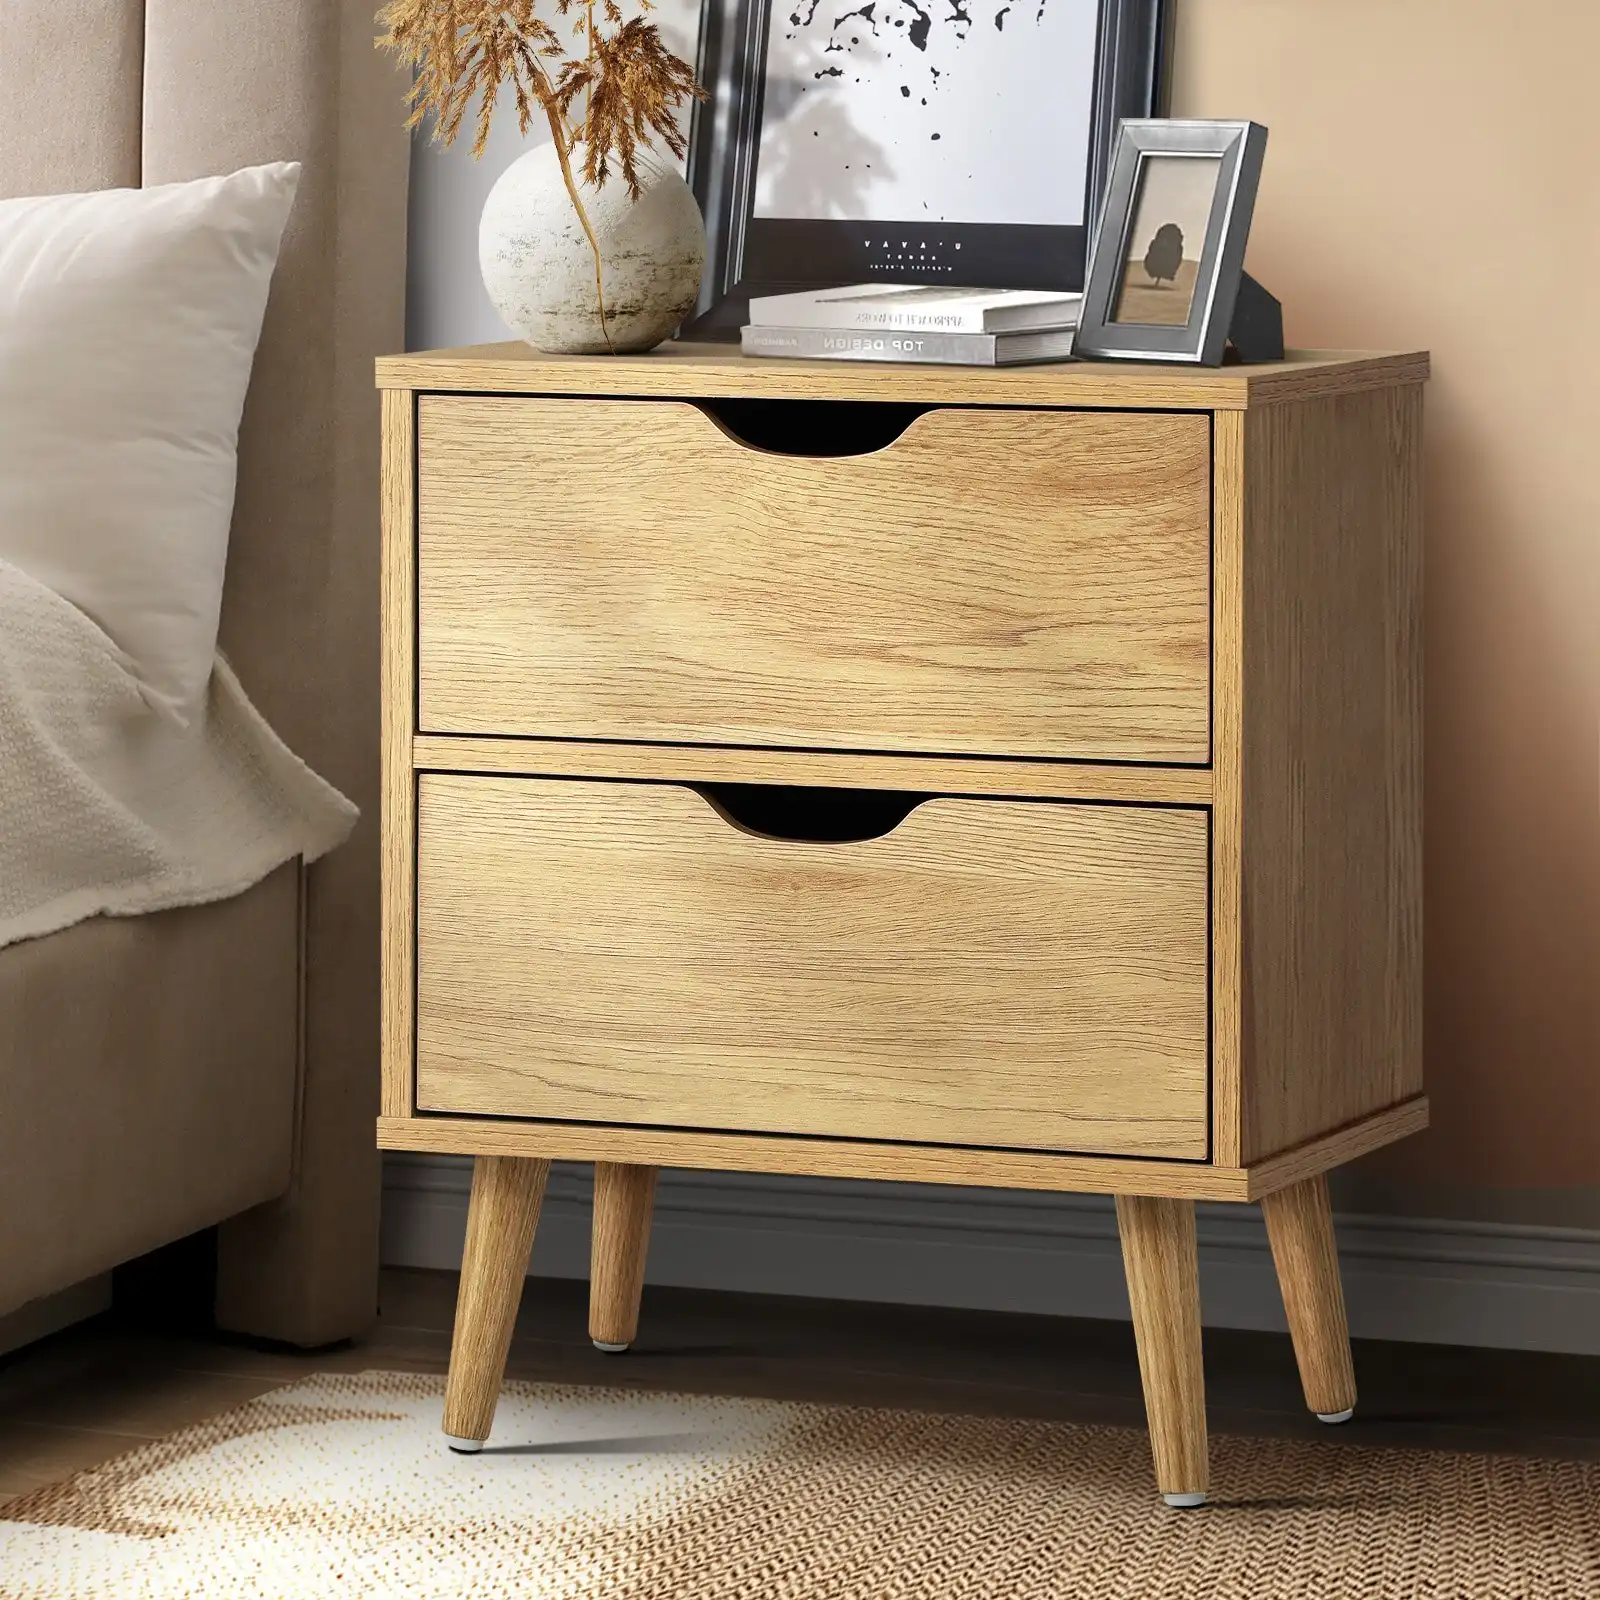 Oikiture Bedside Tables 2 Drawers Side Table Nightstand Storage Cabinet Wood